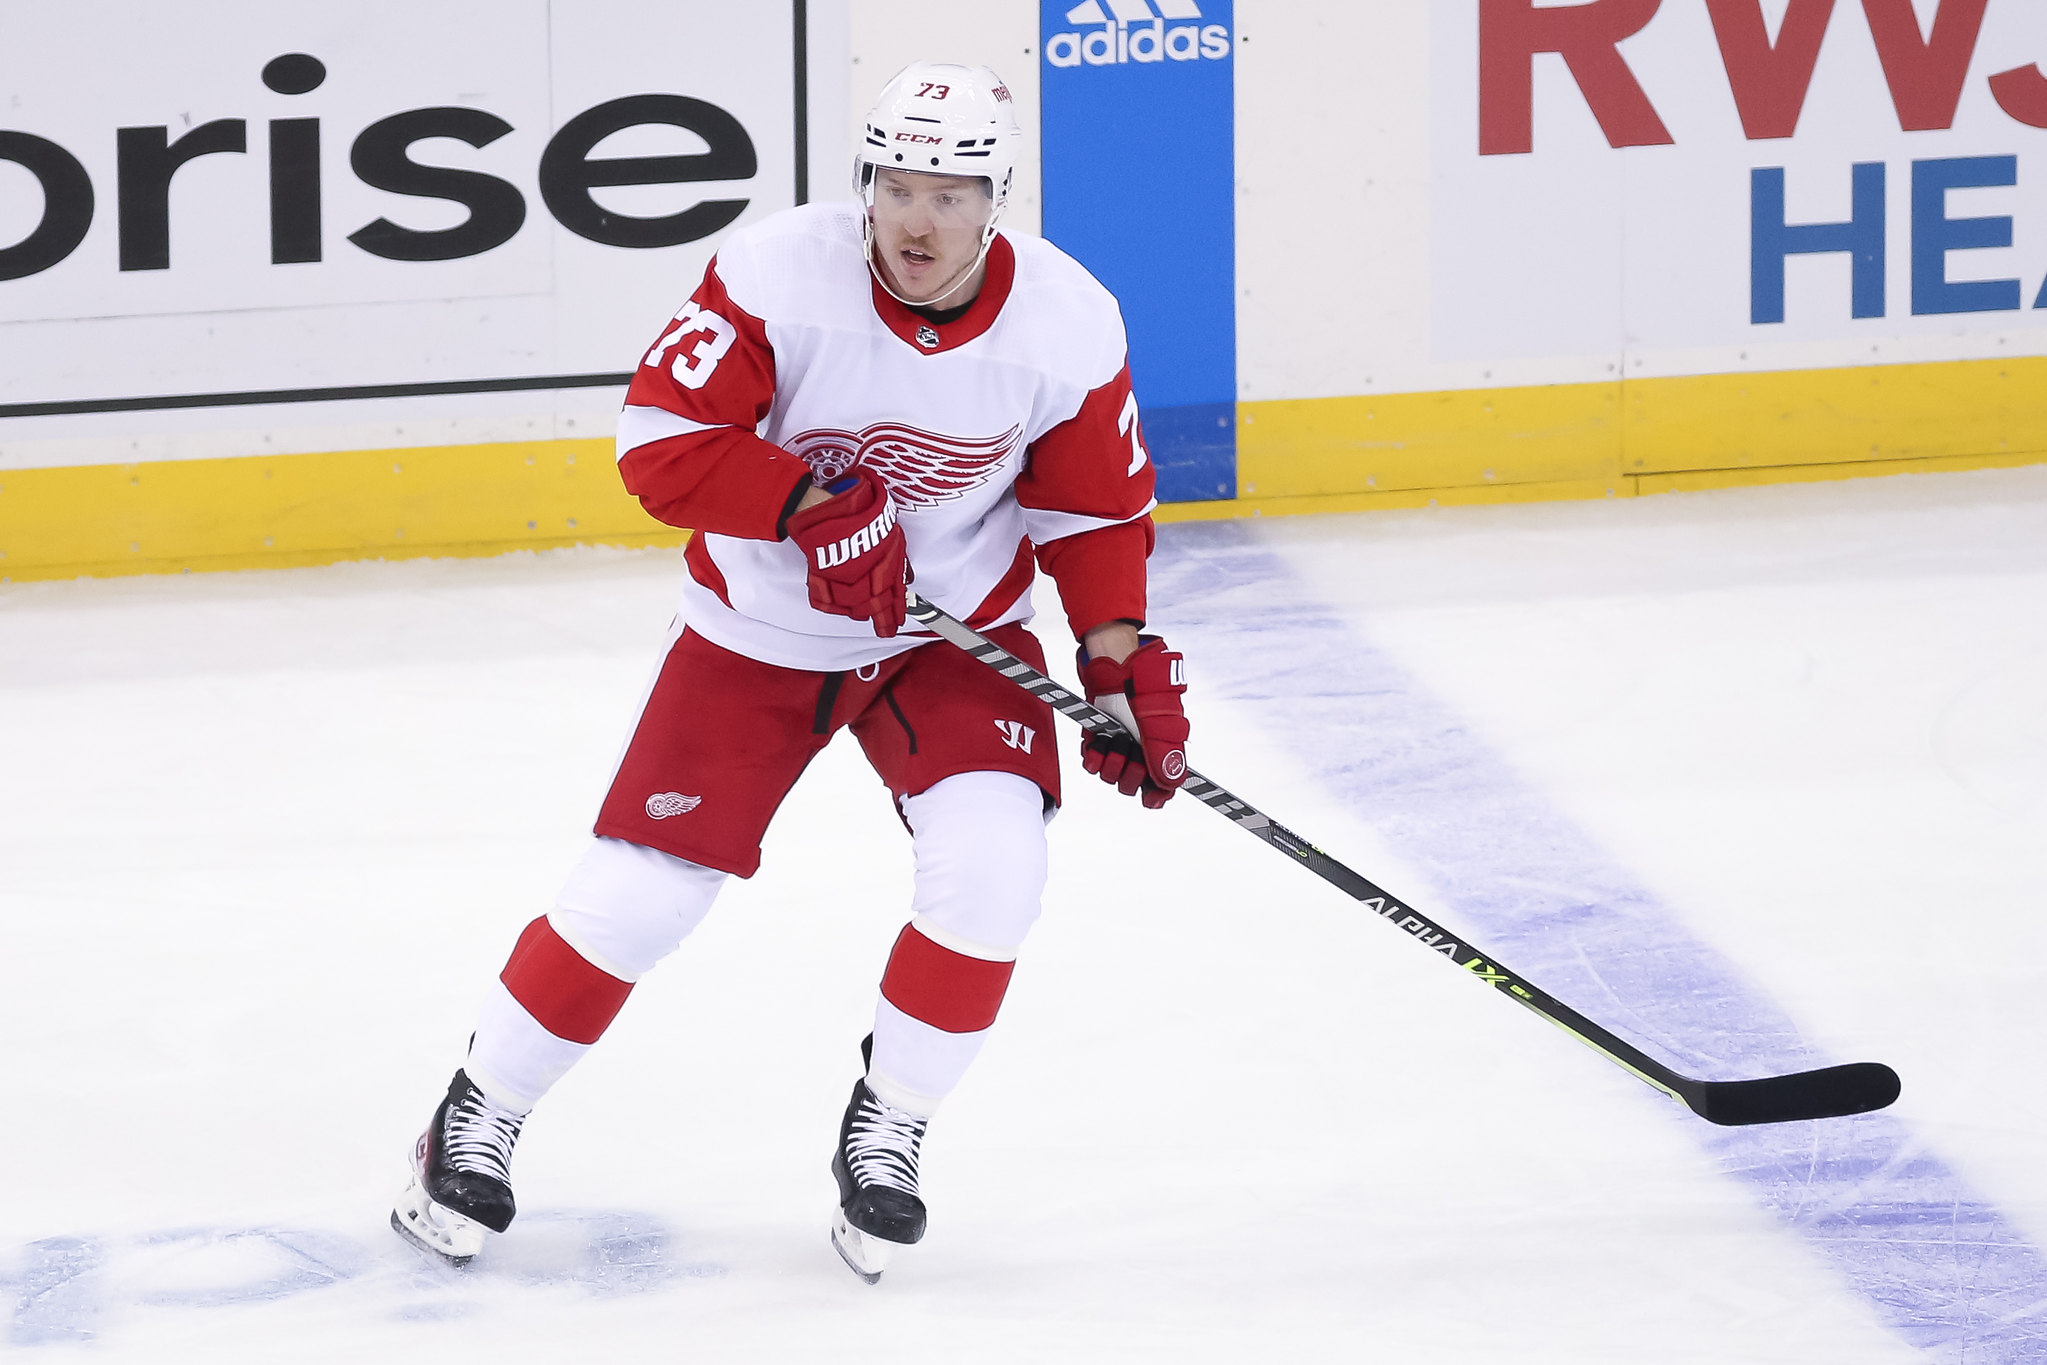 Detroit Red Wings Activate Robby Fabbri from Injured Reserve